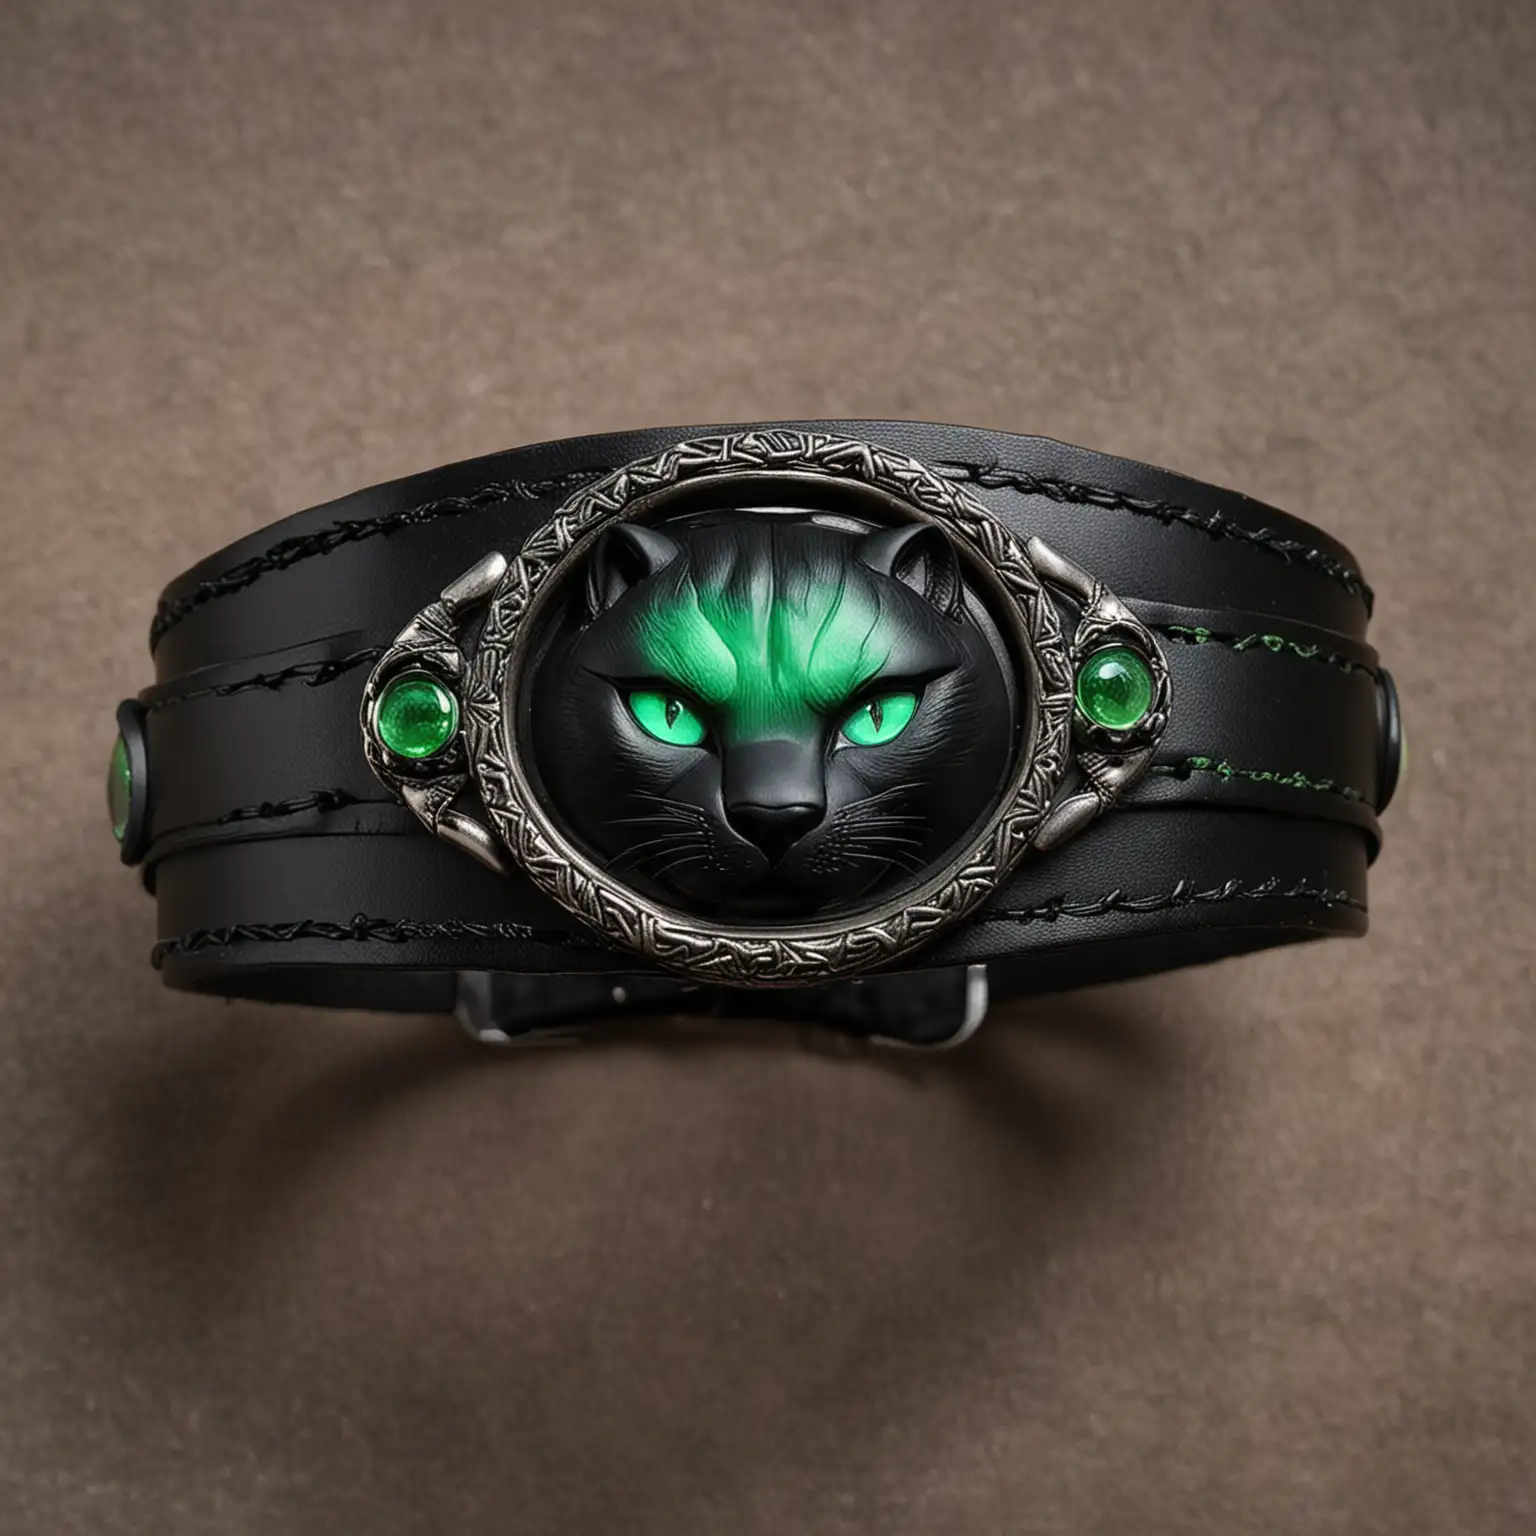 make a black leather wrist band with an oval shaped stone in the center, the oval shaped stone have the face of a black panther with green glowing eyes 